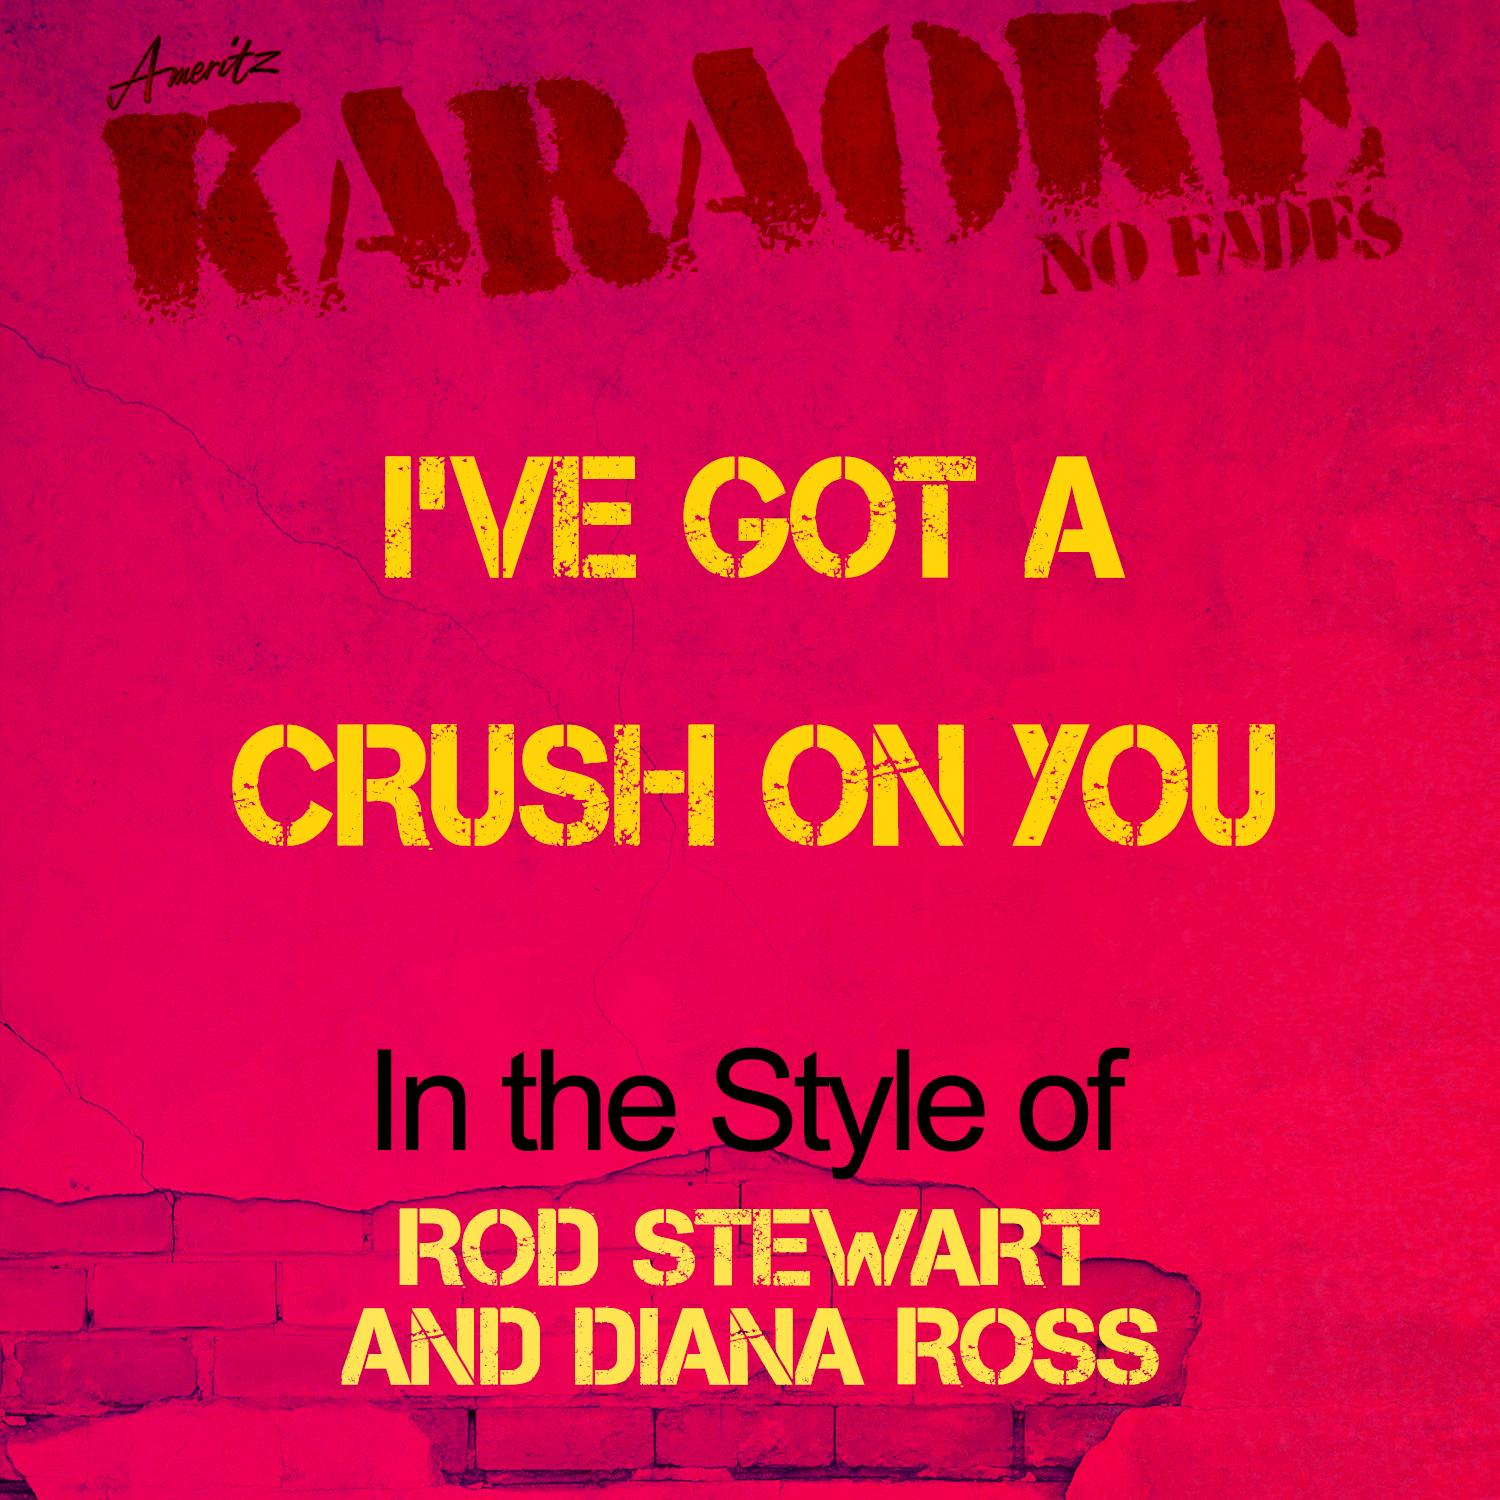 I've Got a Crush on You (In the Style of Rod Stewart and Diana Ross) [Karaoke Version]